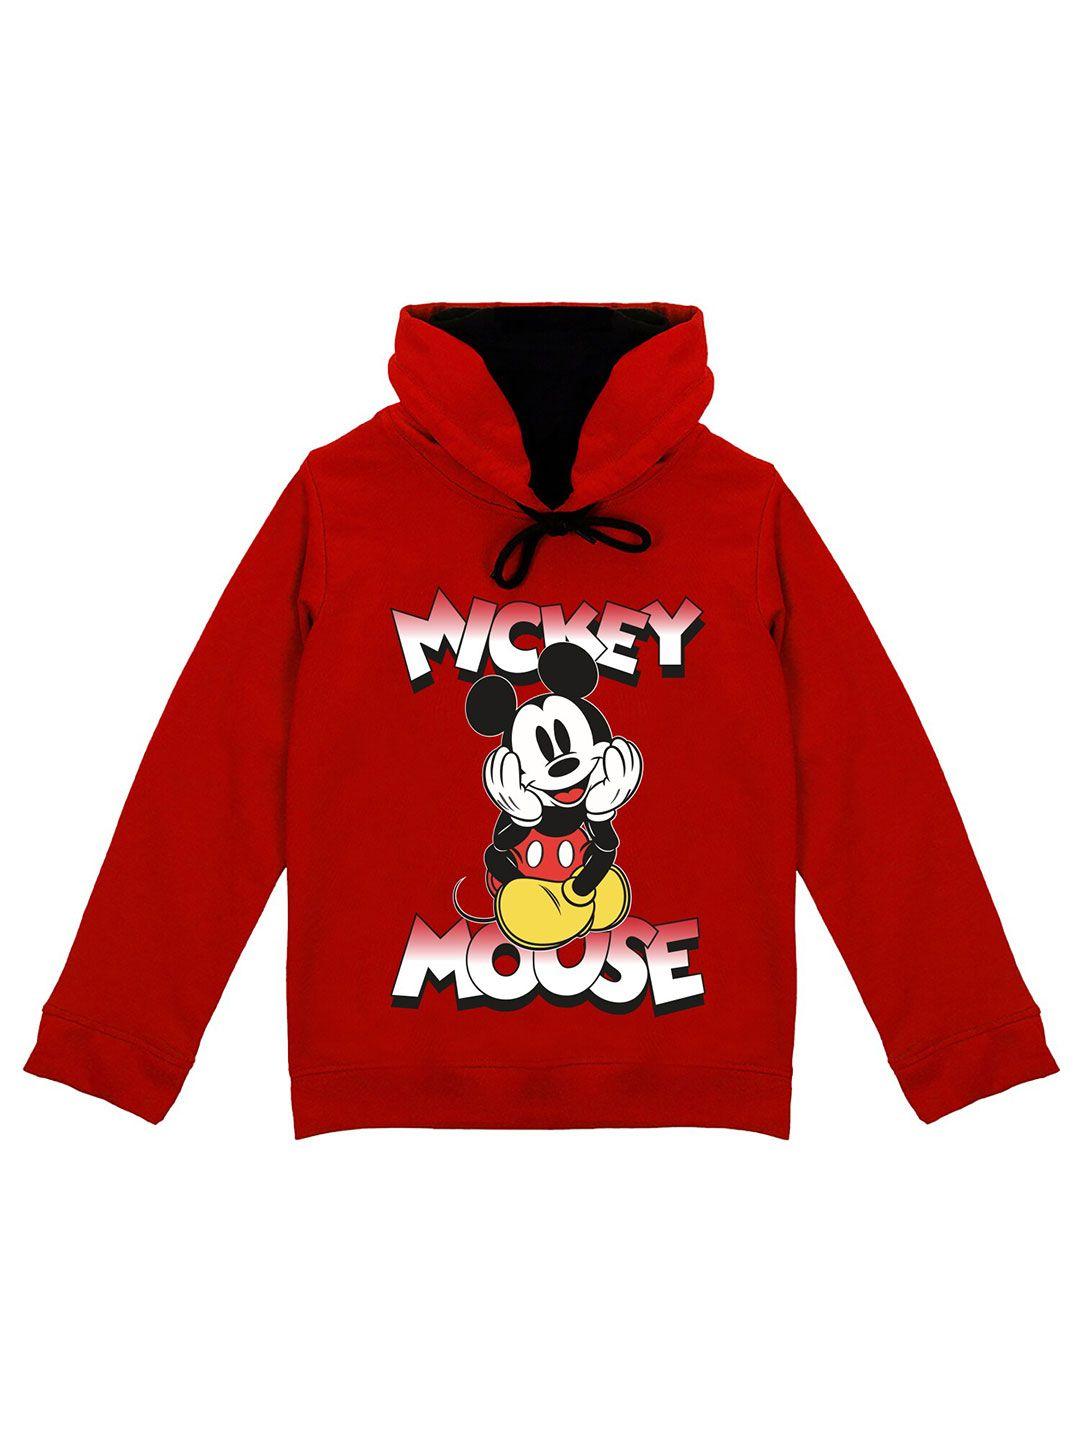 wear your mind boys mickey mouse graphic printed hooded cotton sweatshirt